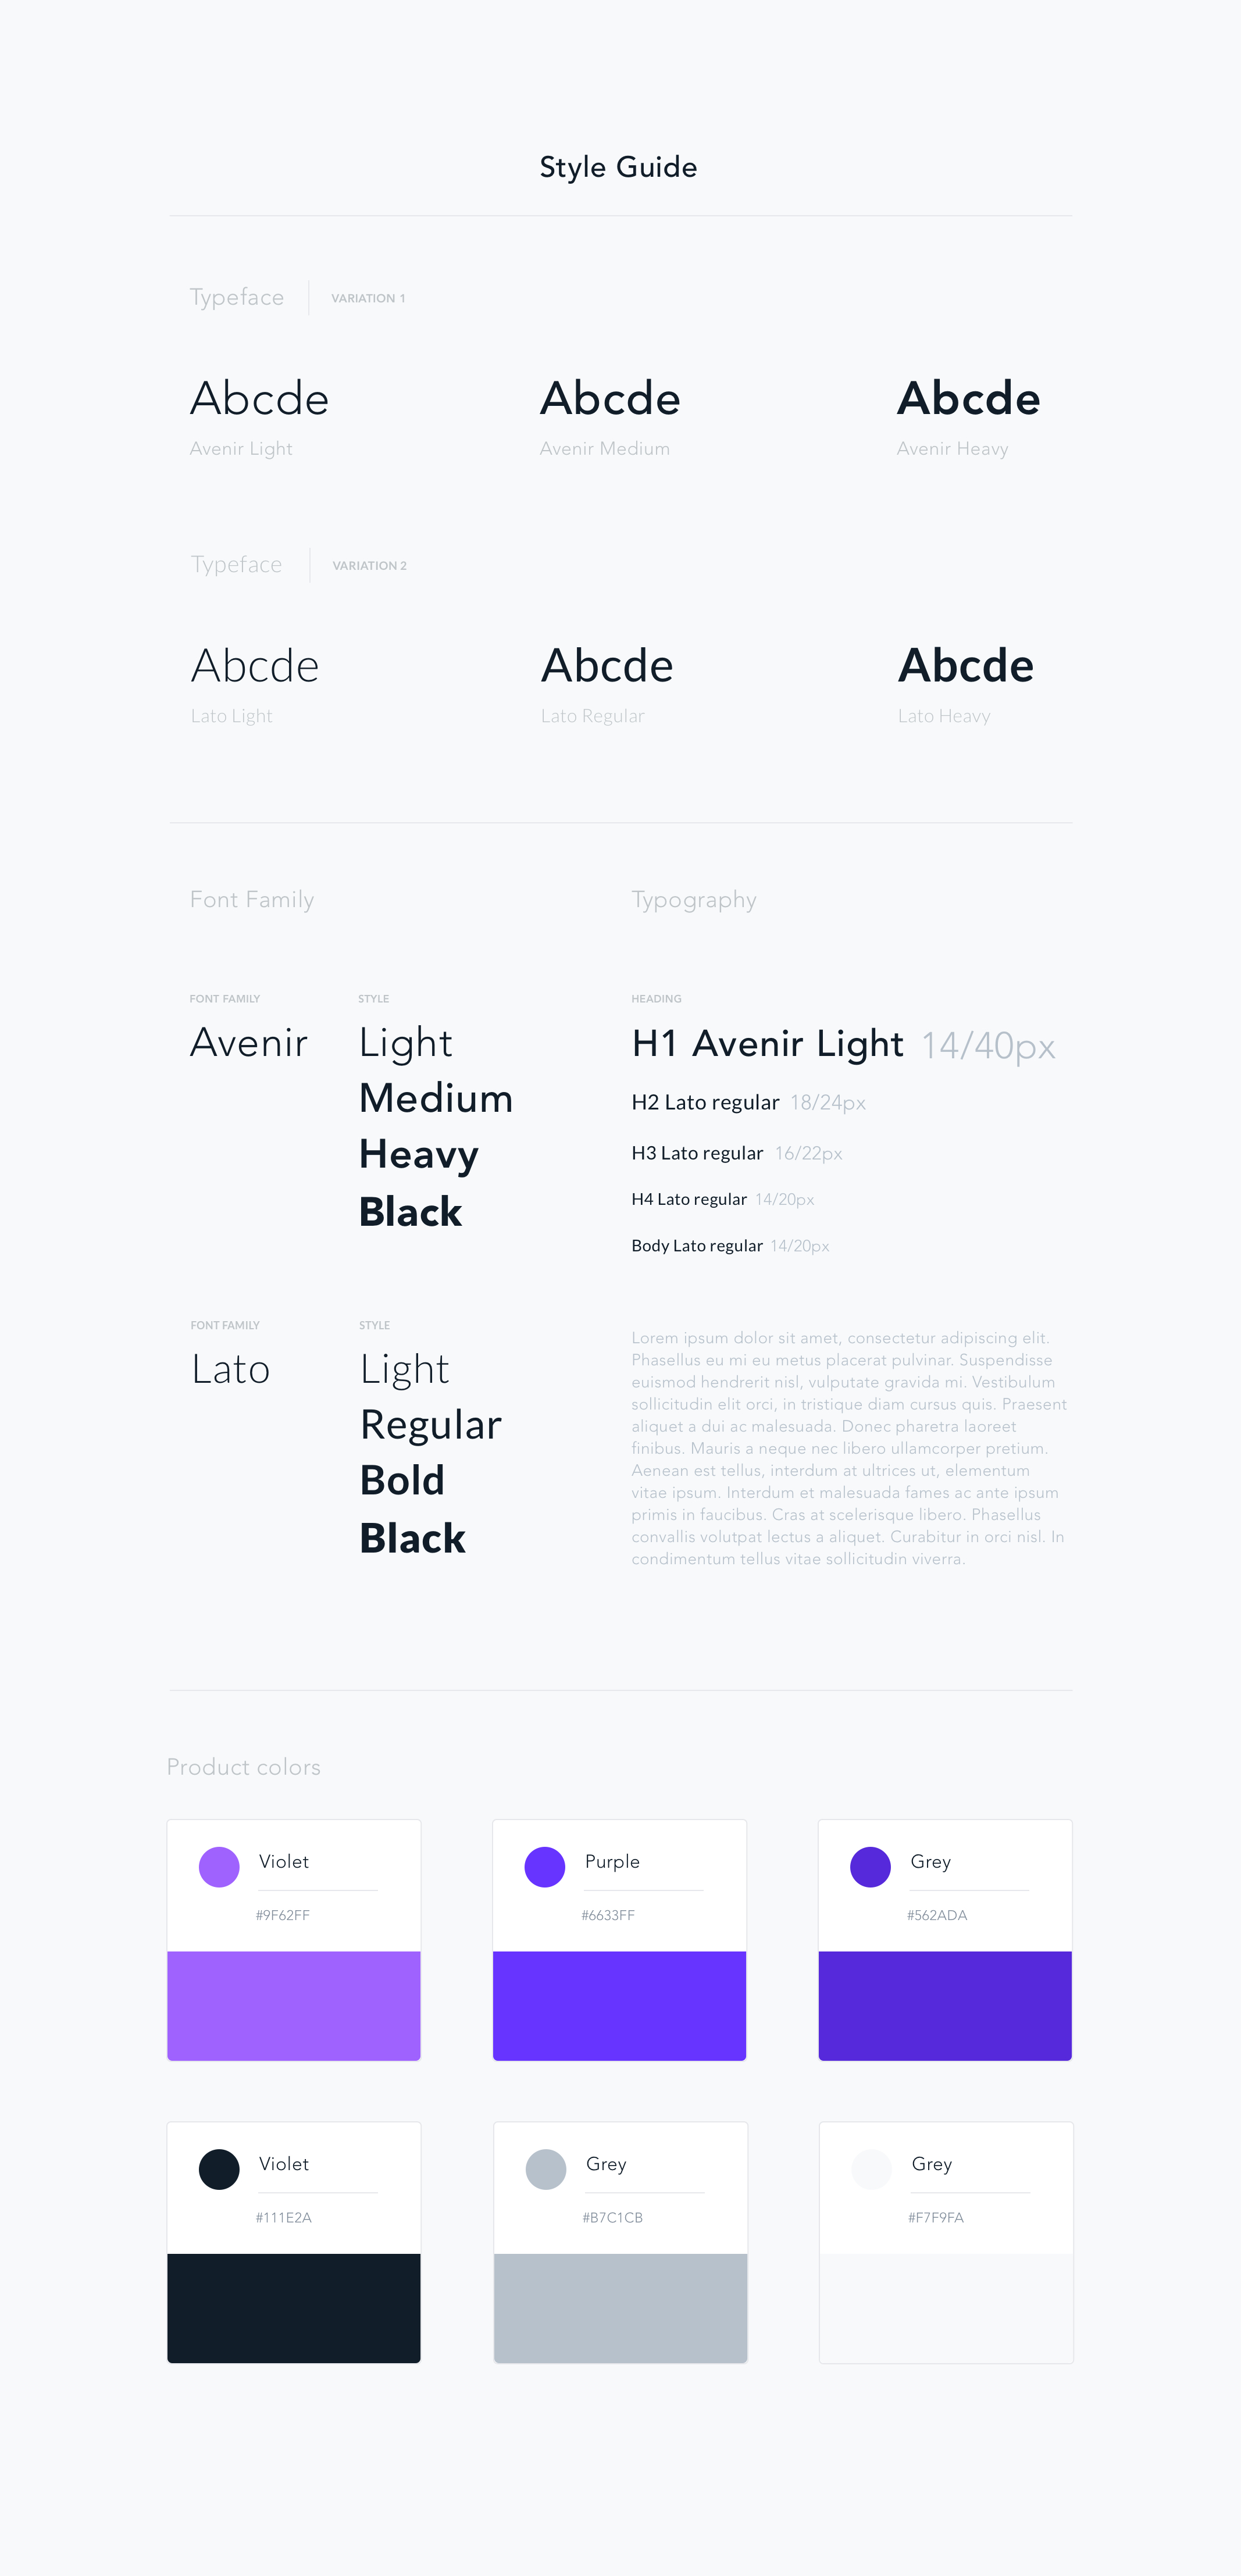 Style Guide App • Product Design by Filipe Moreira on Dribbble